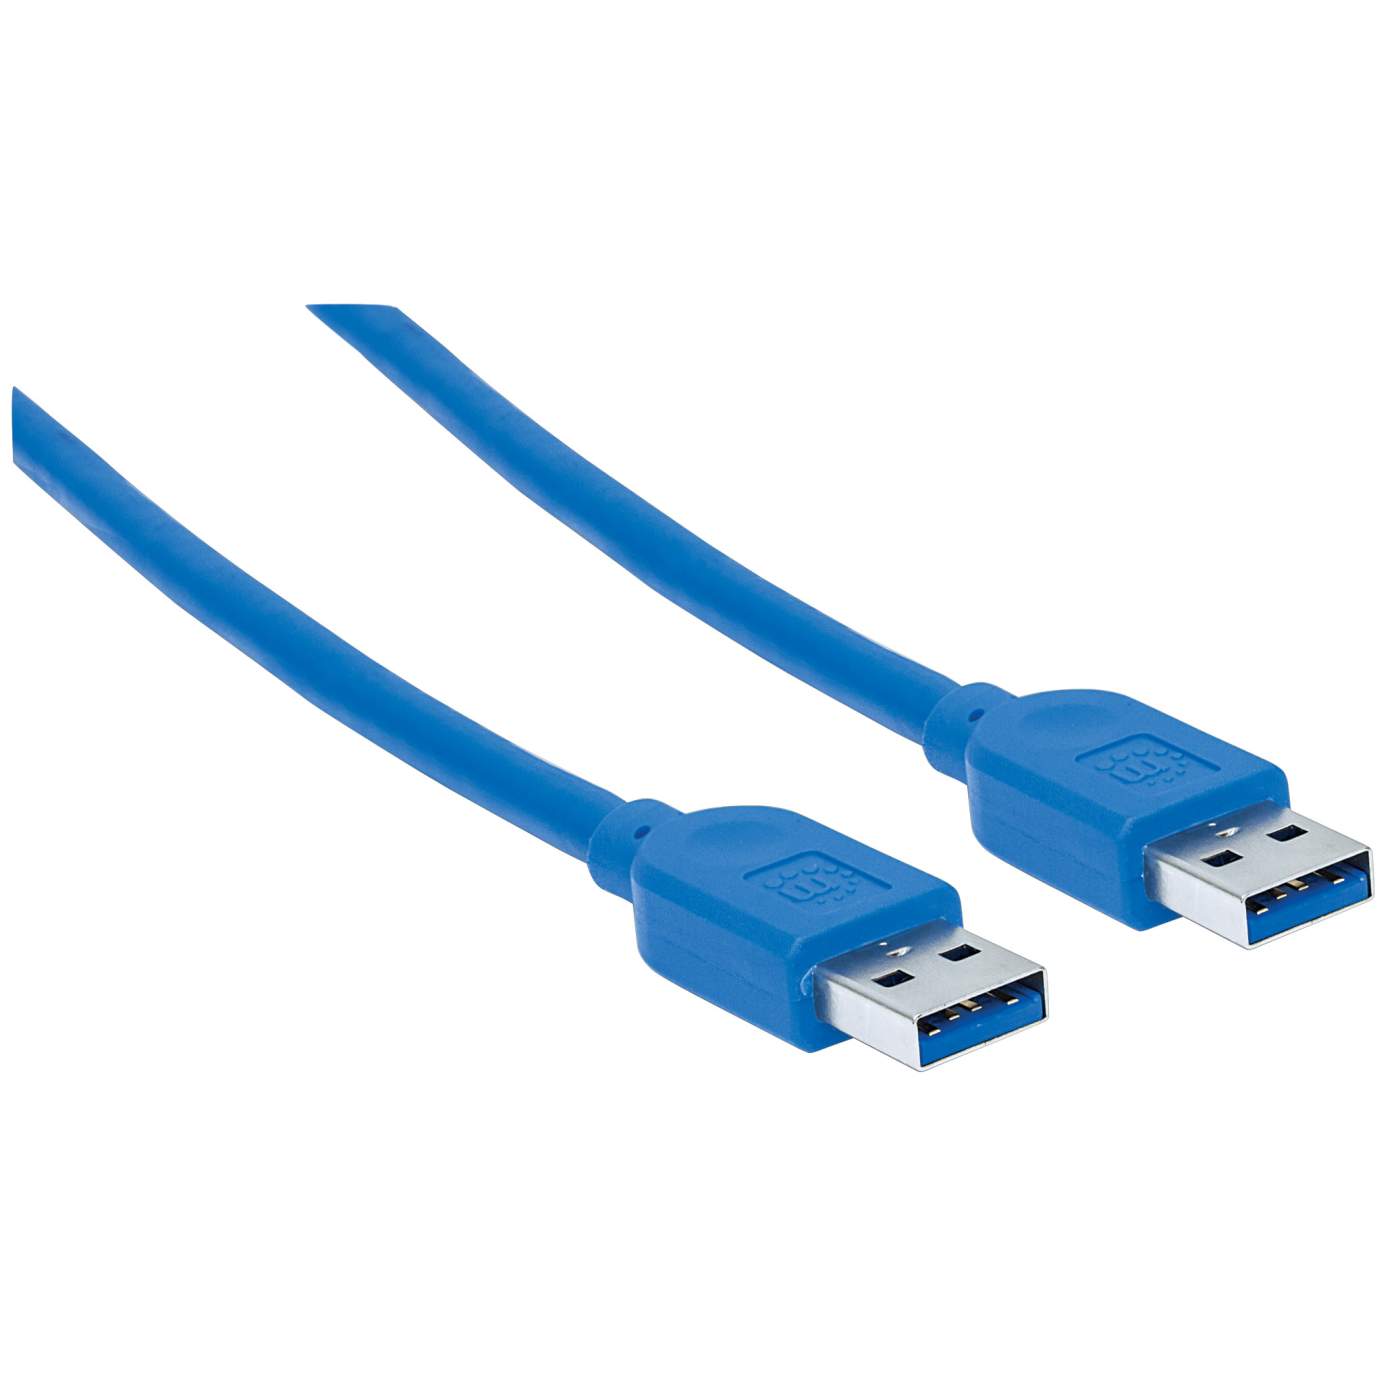 USB 3.0 Type-A Device Cable Image 3